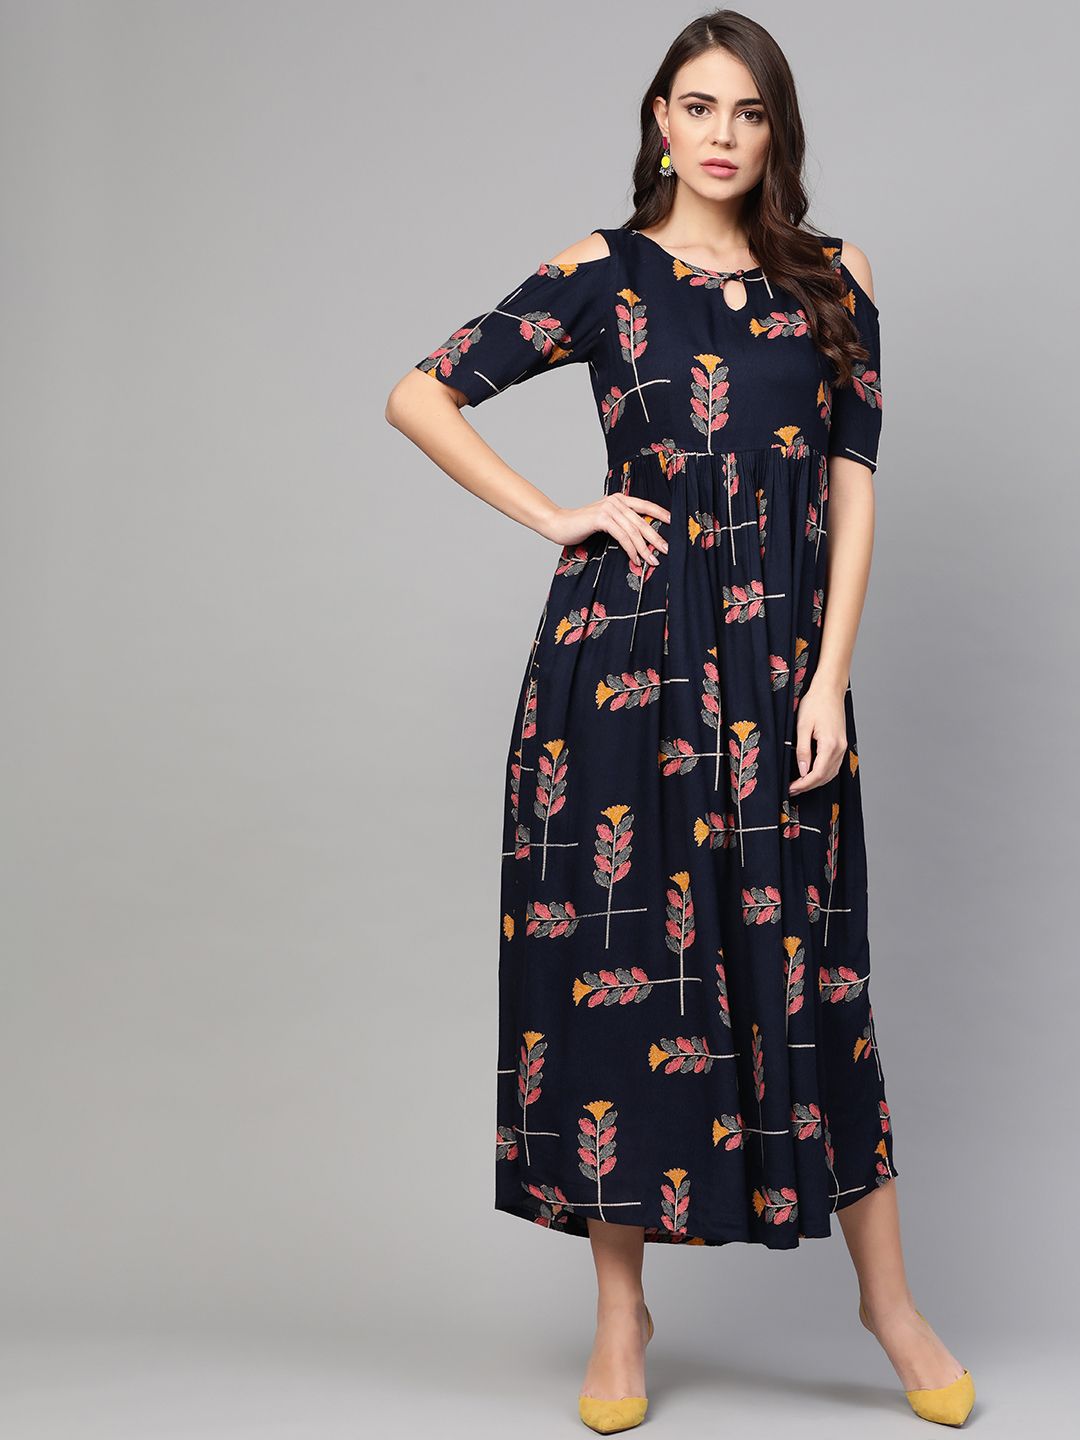 Idalia Women Navy Blue & Pink Floral Printed Cold-Shoulder Maxi Dress Price in India